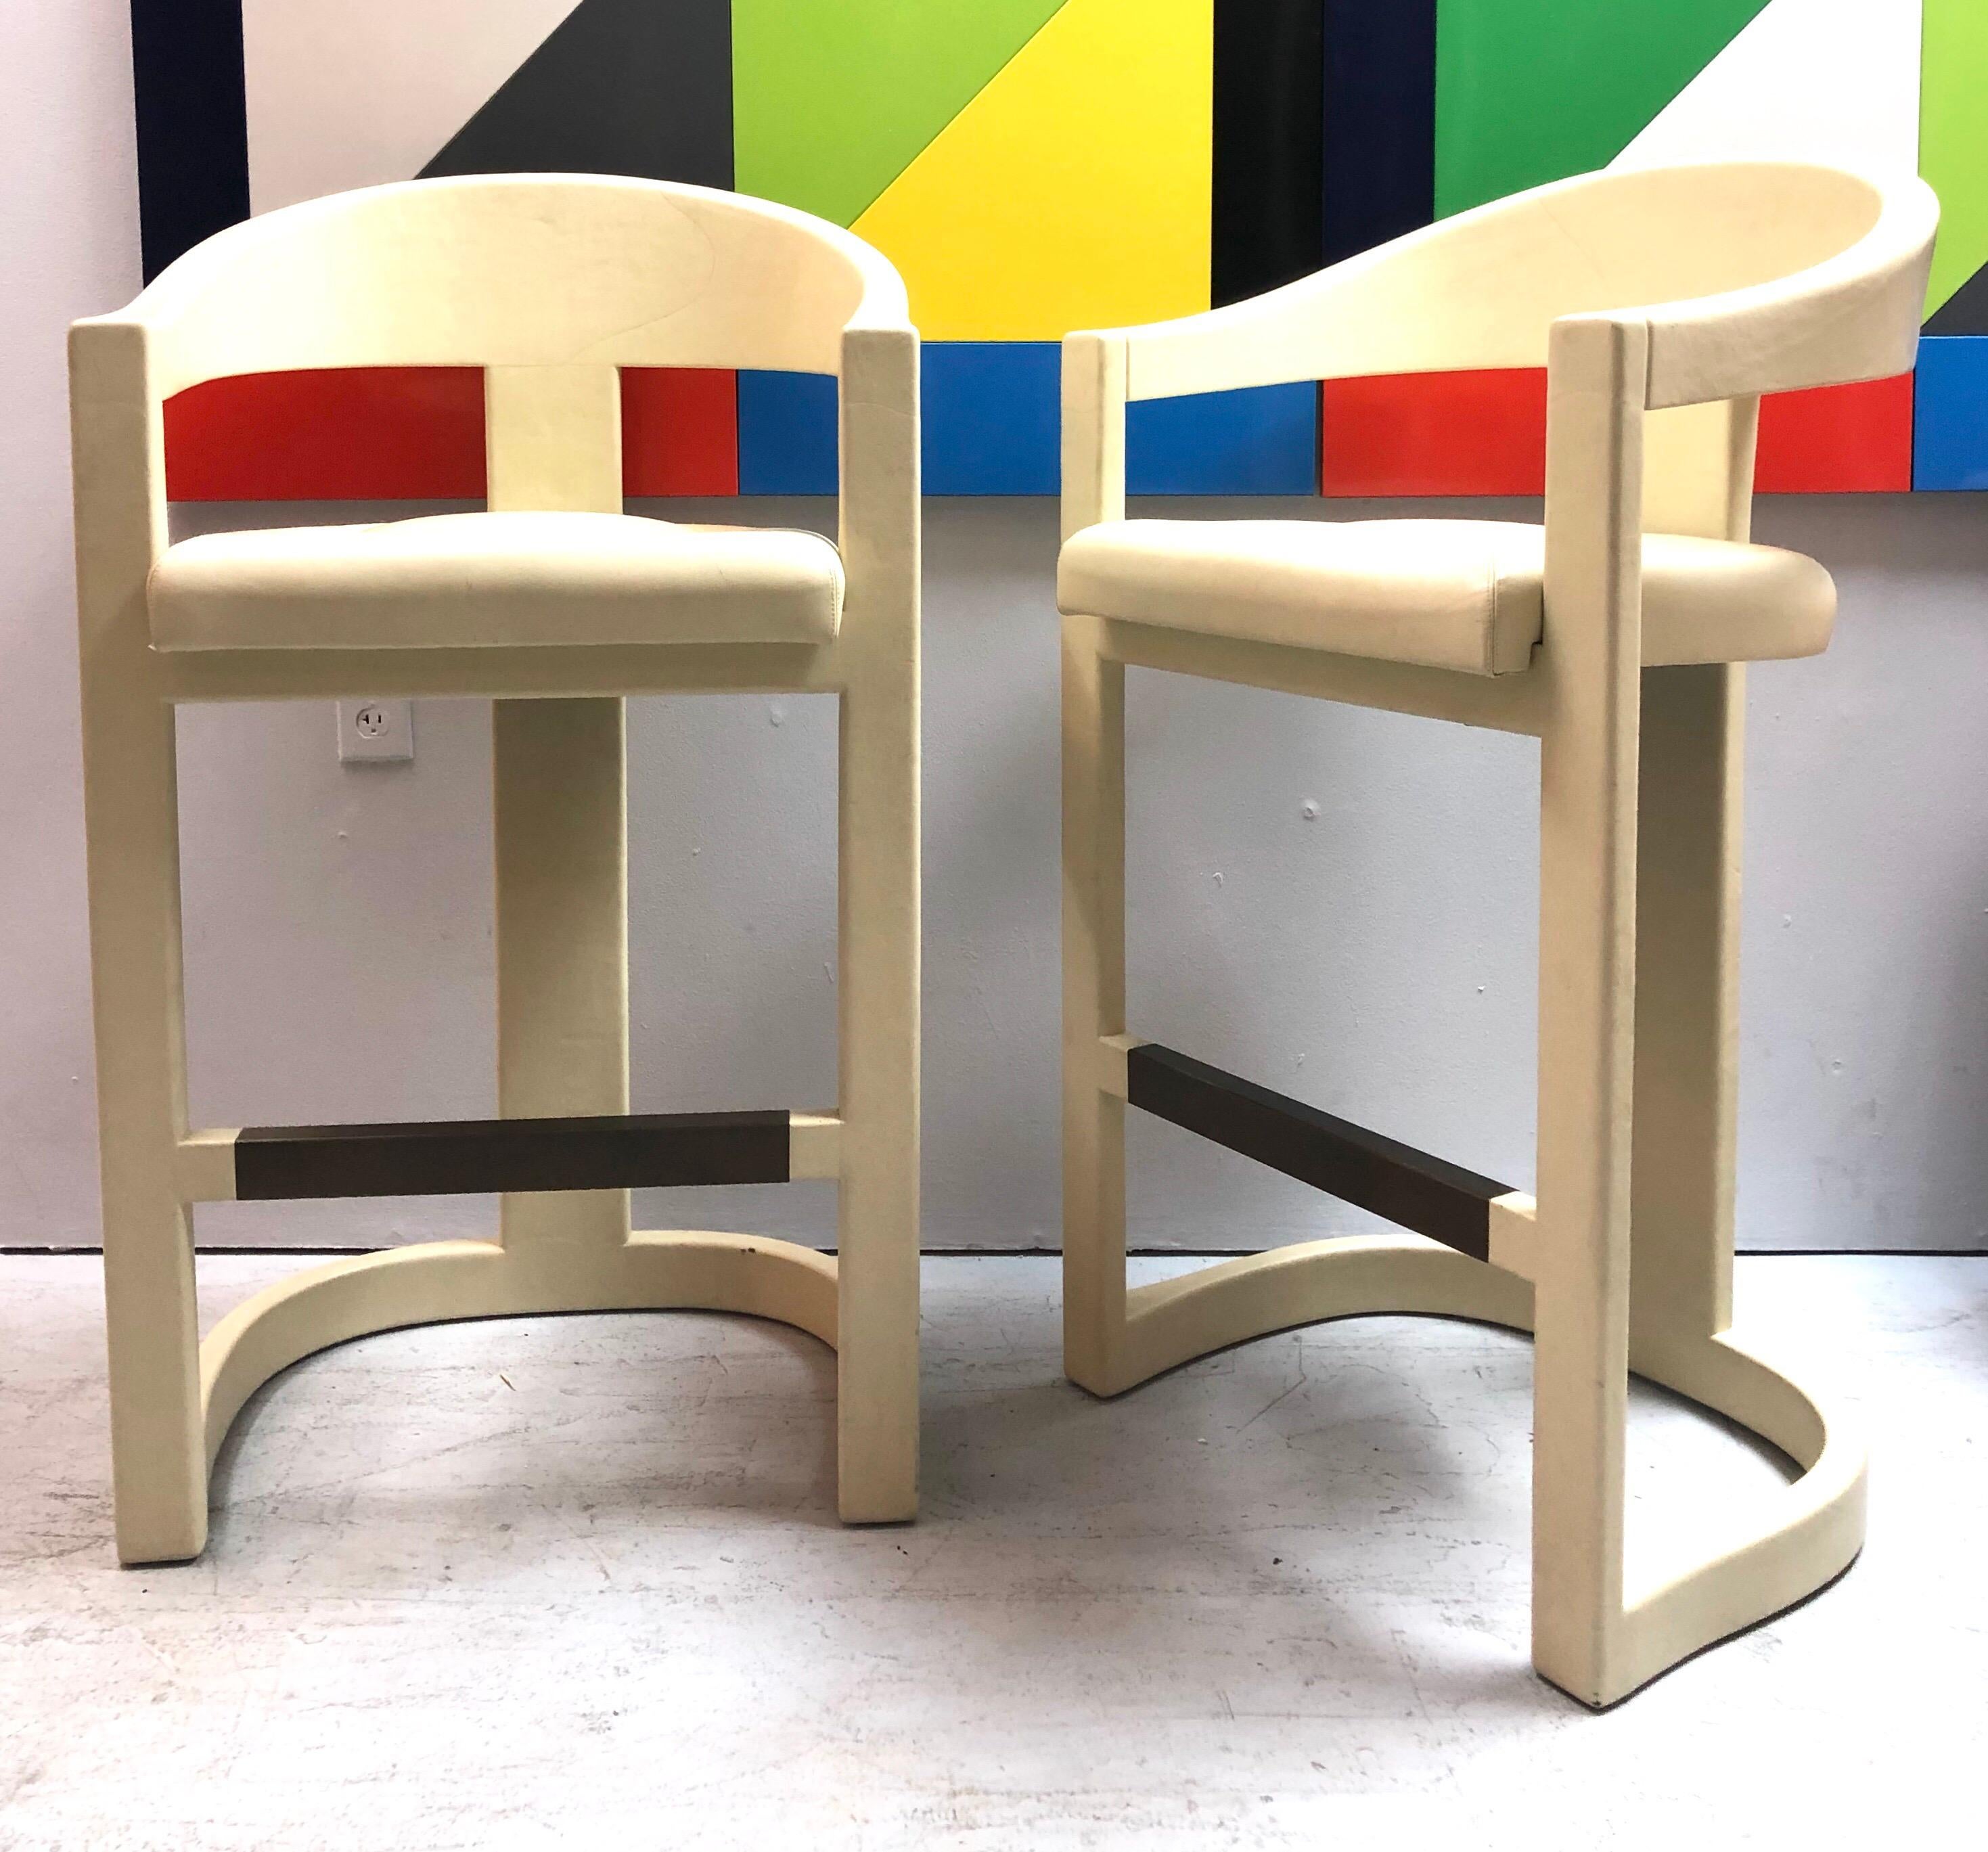 A rare pair of bar stools by Karl Springer. These bar height stools are totally clad in very light neutral bone color leather, same as the seats. The foot rests are brushed antique brass. Very modern-Classic sophisticated look. The leather adds